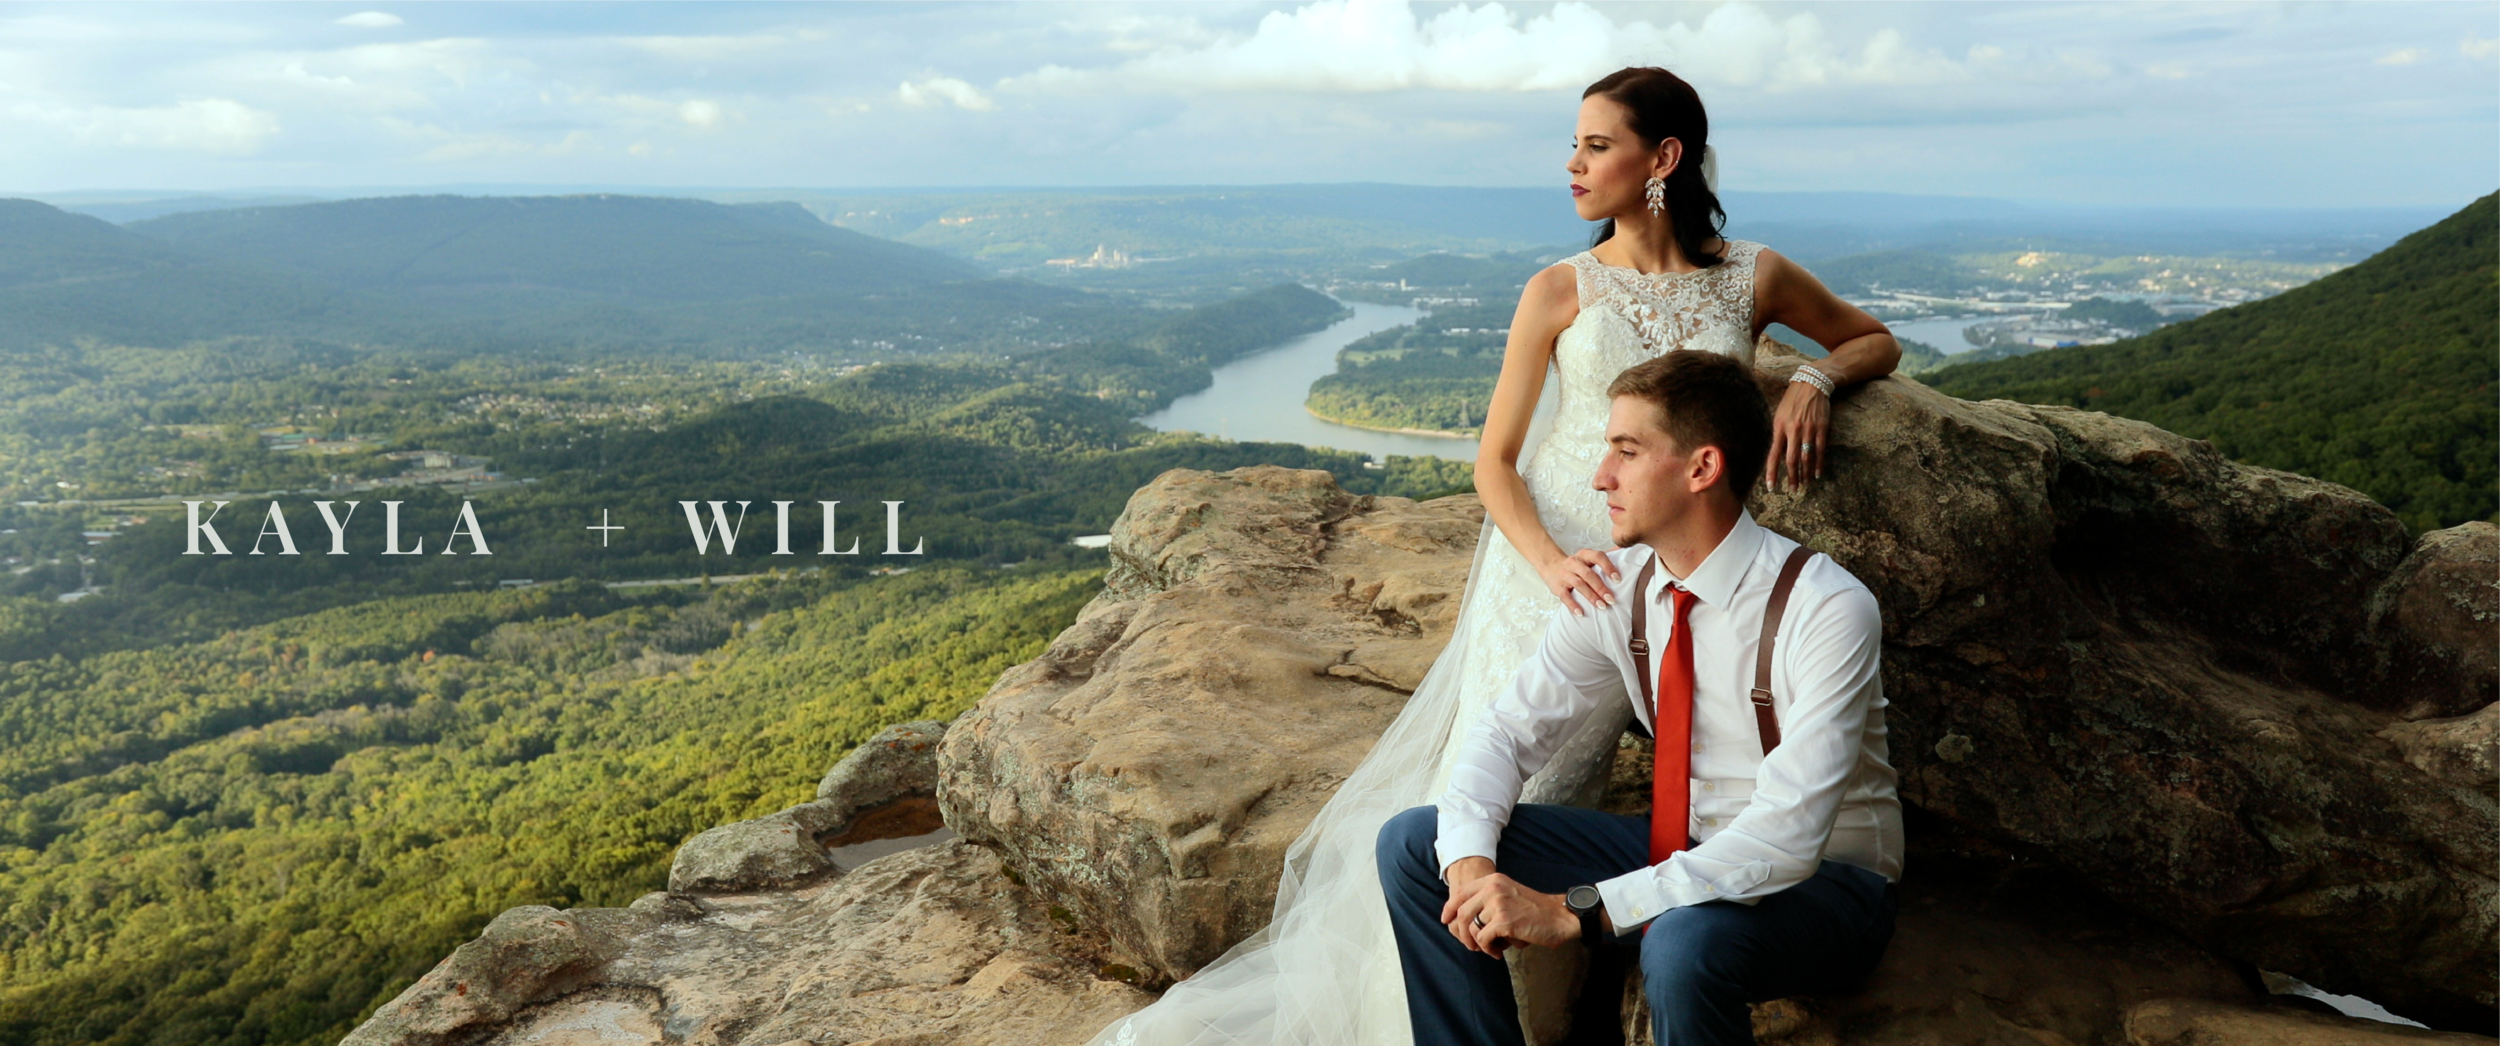 INCREDIBLE Sunset Rock Wedding | Lookout Mountain Tennessee (Copy)